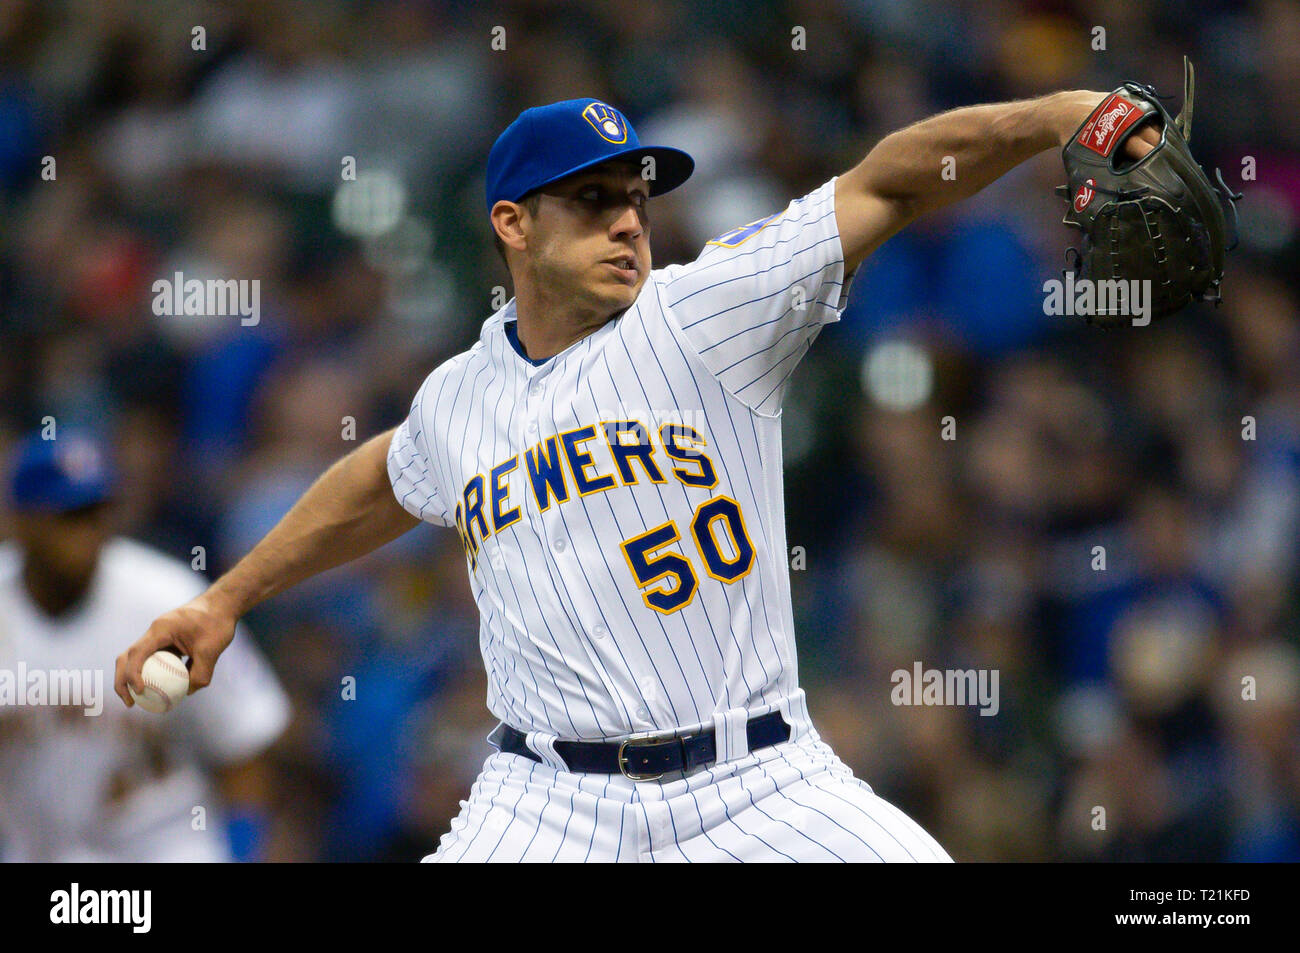 Milwaukee, WI, USA. 29th Mar, 2019. Milwaukee Brewers relief pitcher Jacob Barnes #50 delivers a pitch in relief during the Major League Baseball game between the Milwaukee Brewers and the St. Louis Cardinals at Miller Park in Milwaukee, WI. John Fisher/CSM/Alamy Live News Stock Photo